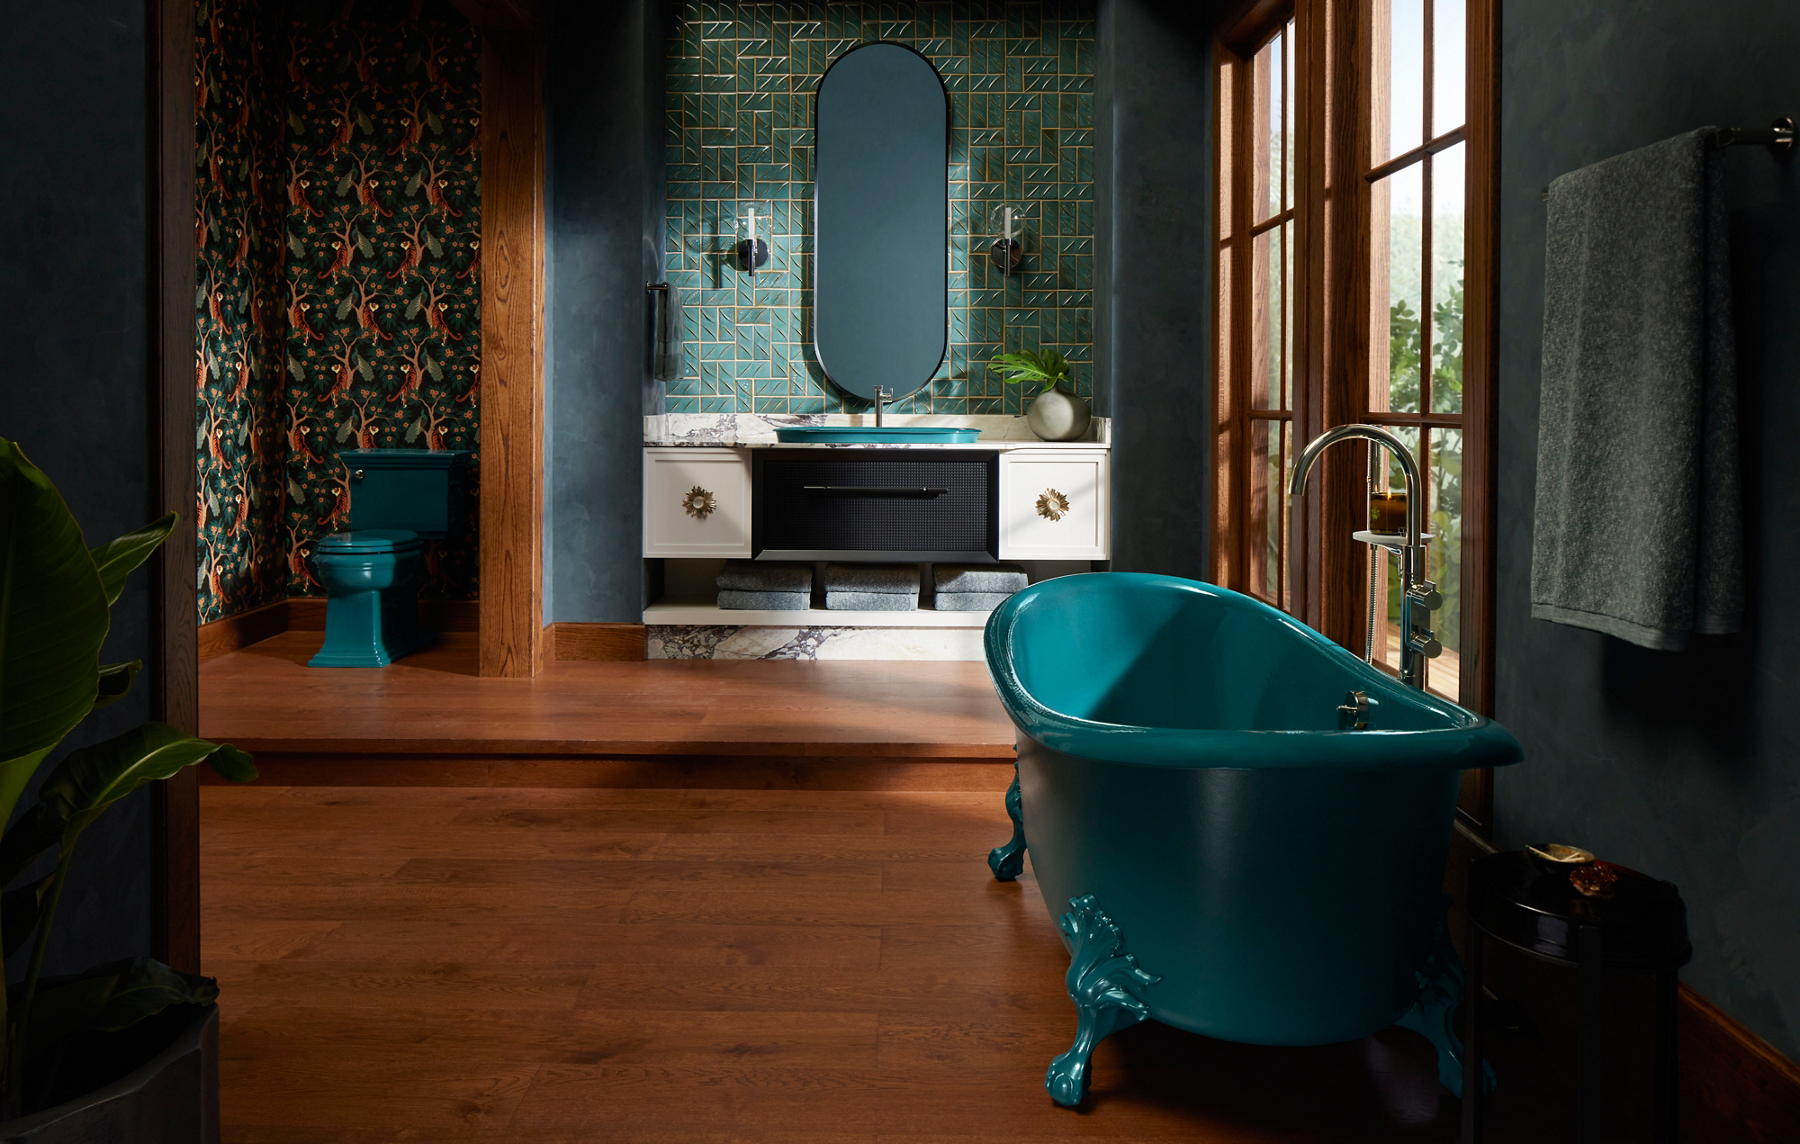 A sunny portrait lifestyle product shot of a teal claw bathtub positioned at a slight angle. The bathtub is made with silver faucets and is surrounded by a tall window at the left, and a towel rack attached to the right side of the wall.